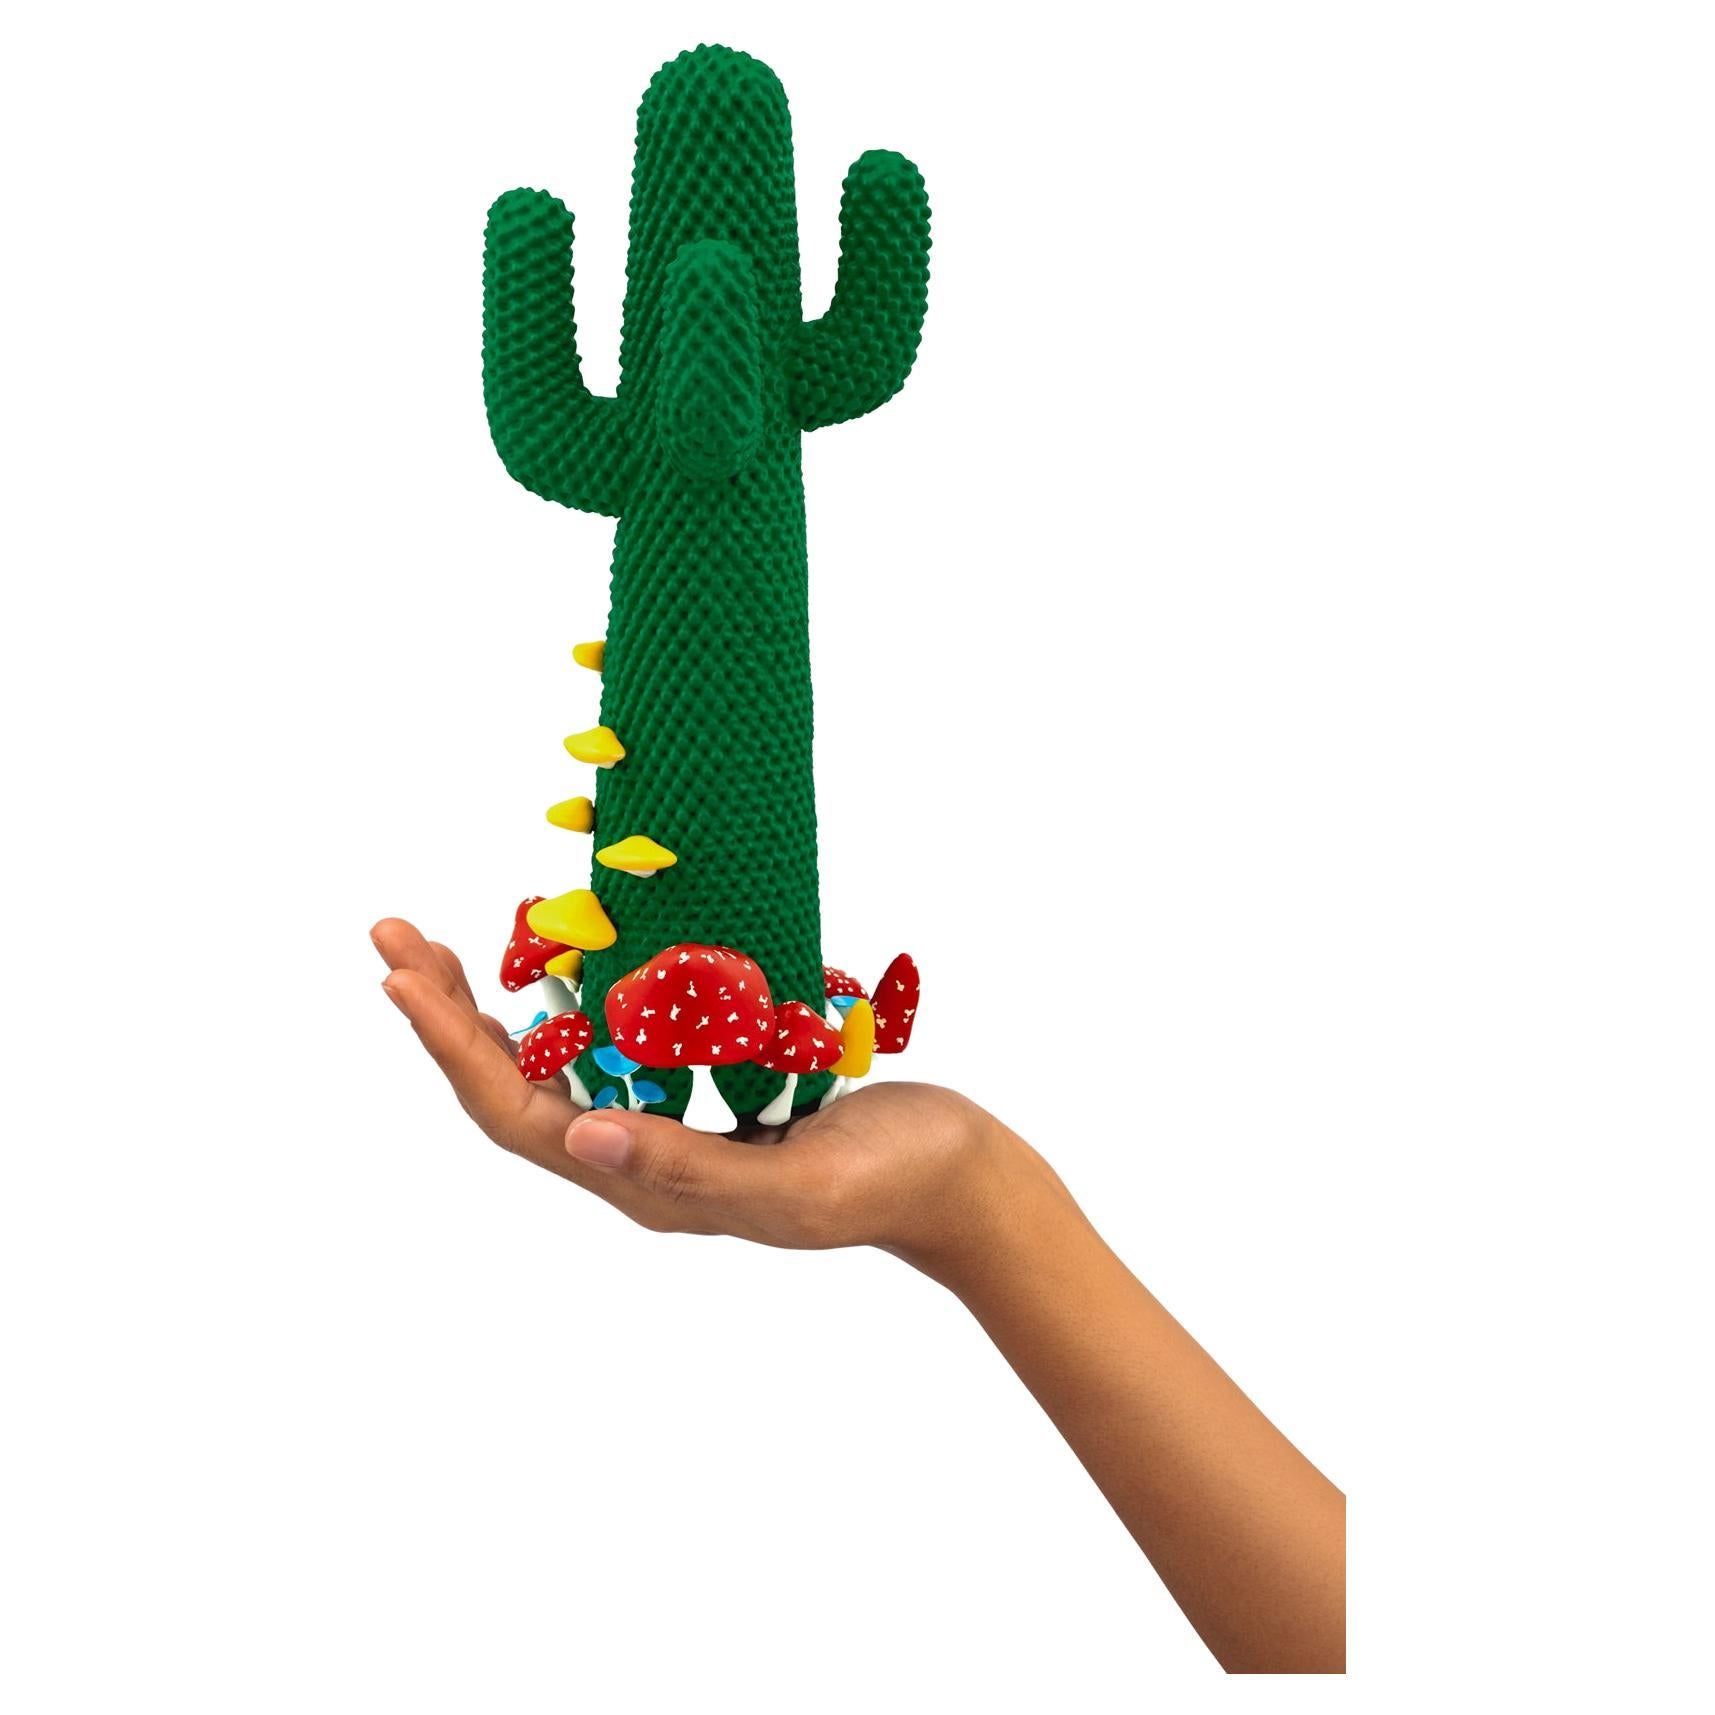 LIMITED EDITION #46/99

Gufram presents the miniaturised version of the Shroom CACTUS® created in collaboration with A$AP Rocky and the artist’s new design studio HOMMEMADE Exactly as the real-size Shroom CACTUS®, the new Guframini piece features